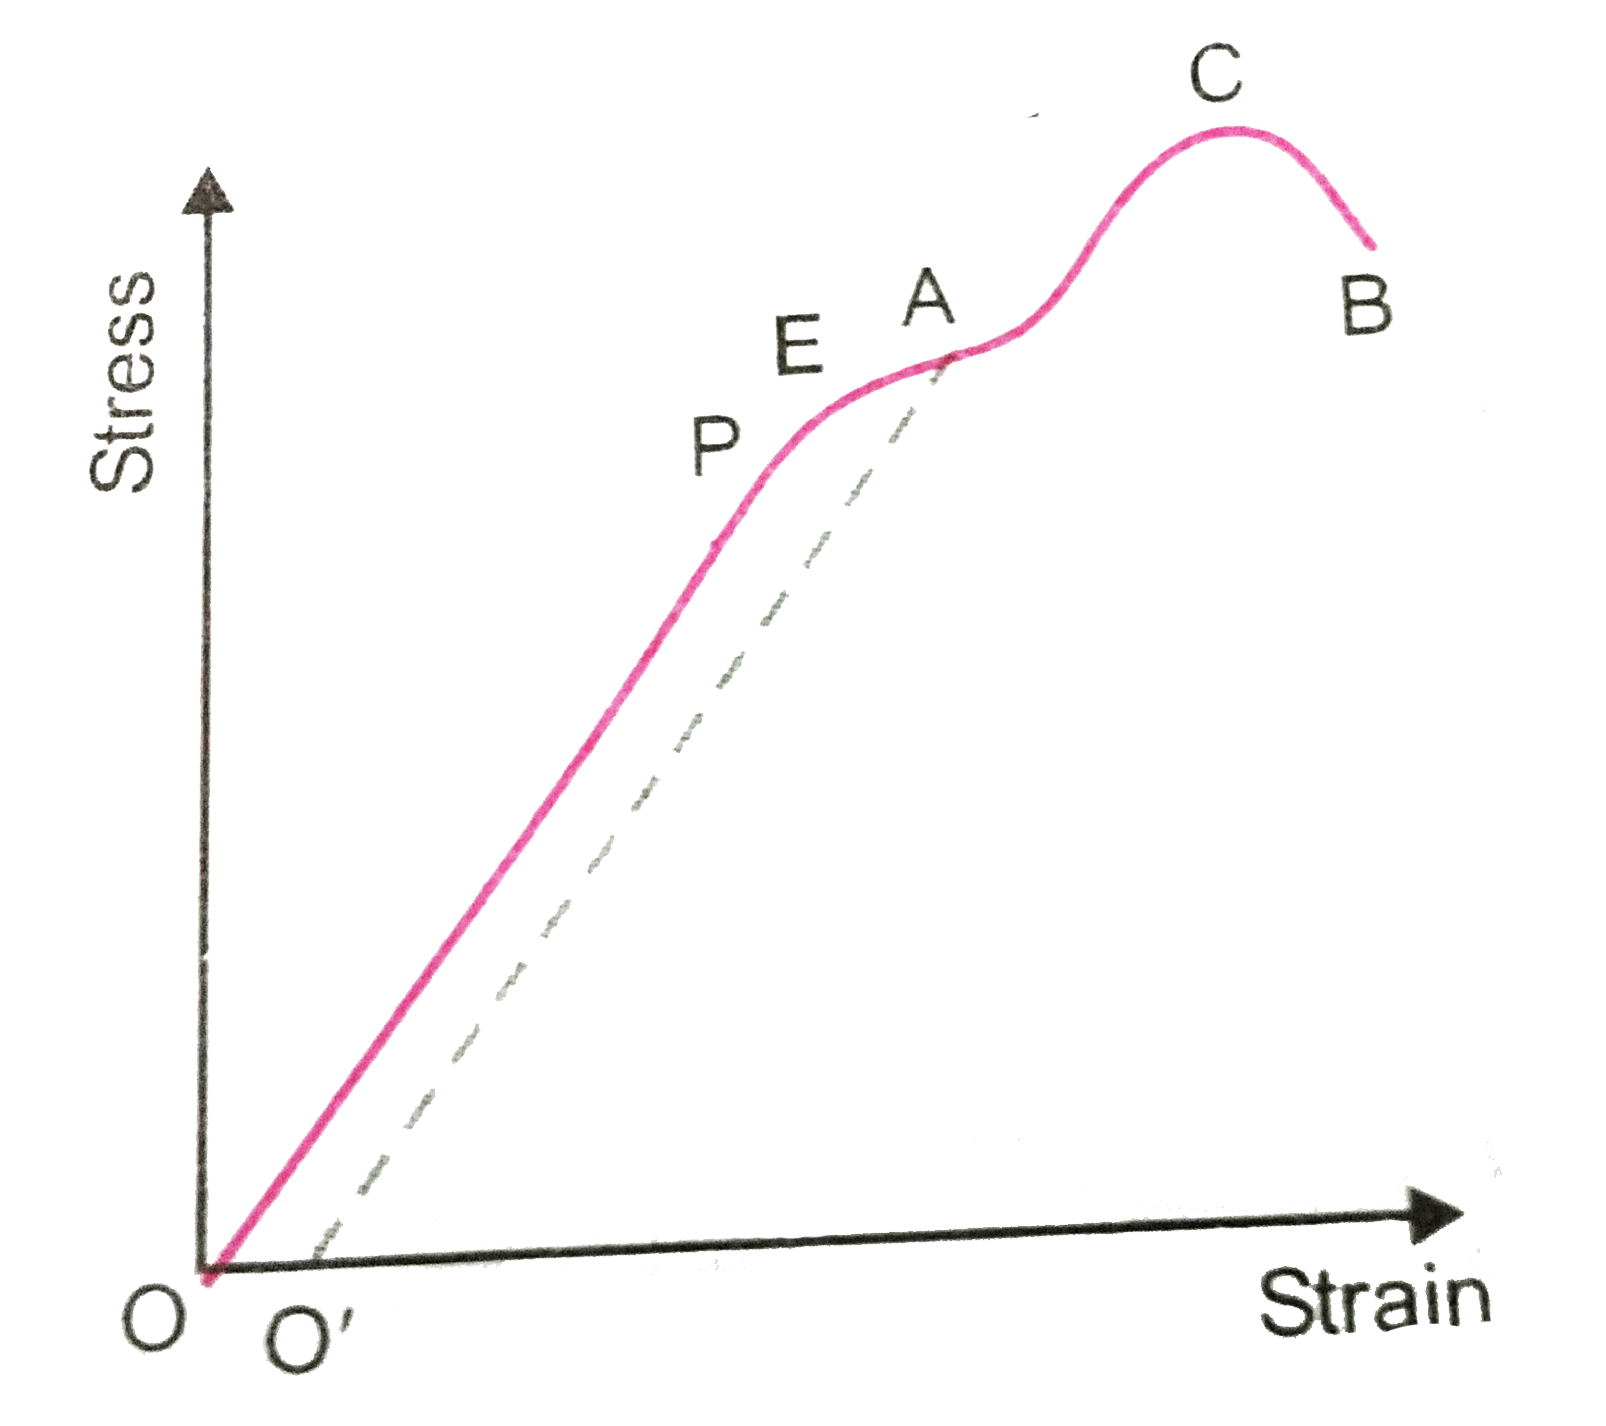 The stress strain graph for a metal wire is shown in the fig. Up to the point E, the wire returns to its original state O along the curve EPO, when  it is gradually unloaded. Point B corresponds to the fracture of the wire.      (a) Up to what point on the curve is Hooke's law obeyed? (this point some times called proportional limits).   (b) Which point on the curve corresponding to elastic limit or yield point of the wire?   (c ) Indicate the elastic and plastic regions of the stress-strain graph.   (d) Describe what happens when the wire is loaded up to a stress corresponding to the point A on the graph and then unloaded gradually. In particular explain the dotted curve.   (e) What is peculiar about the portion of the stress- strain graph from C to B? Up to what stress can the wire be subjected without causing fracture?